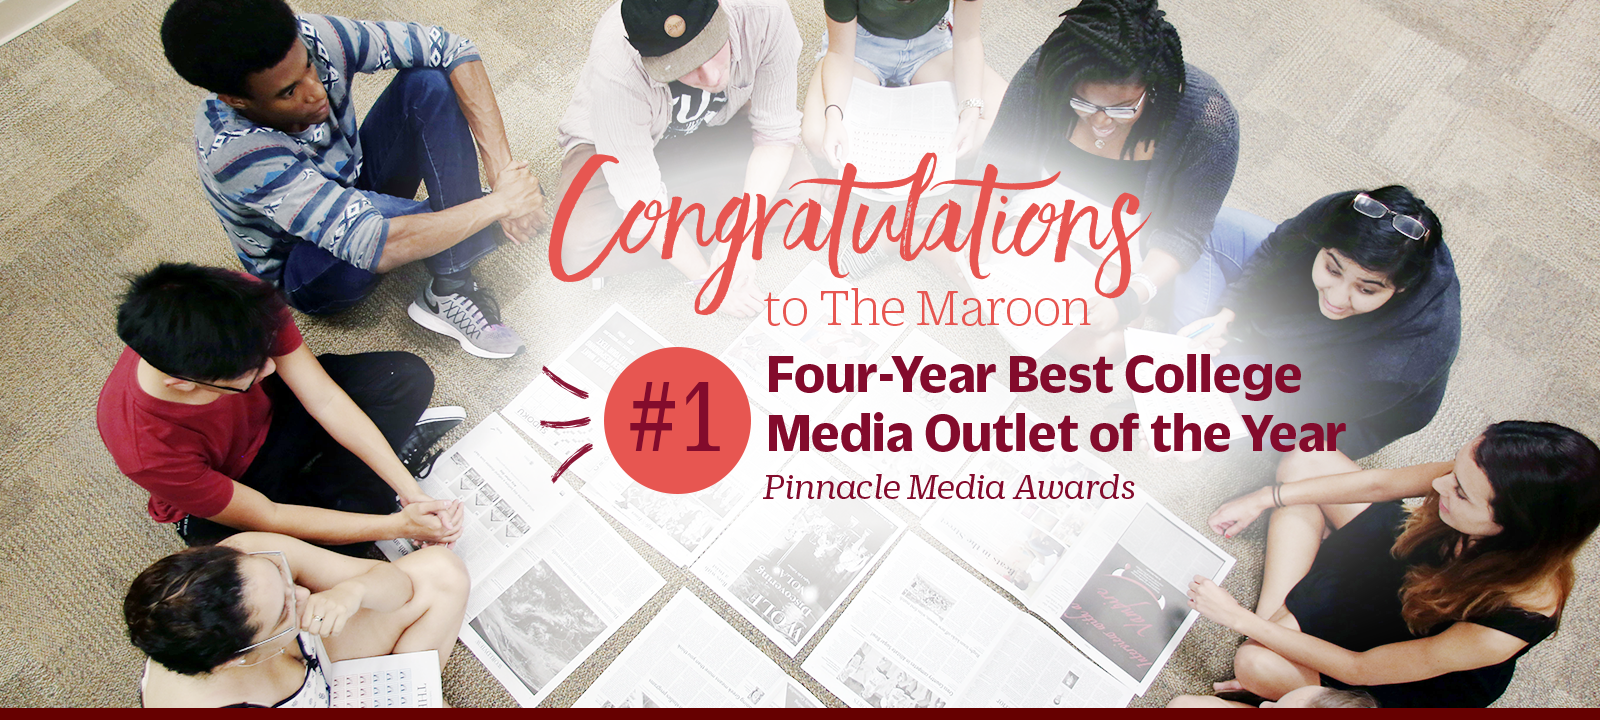 Loyola newspaper wins Best College News Outlet of the Year! Learn more